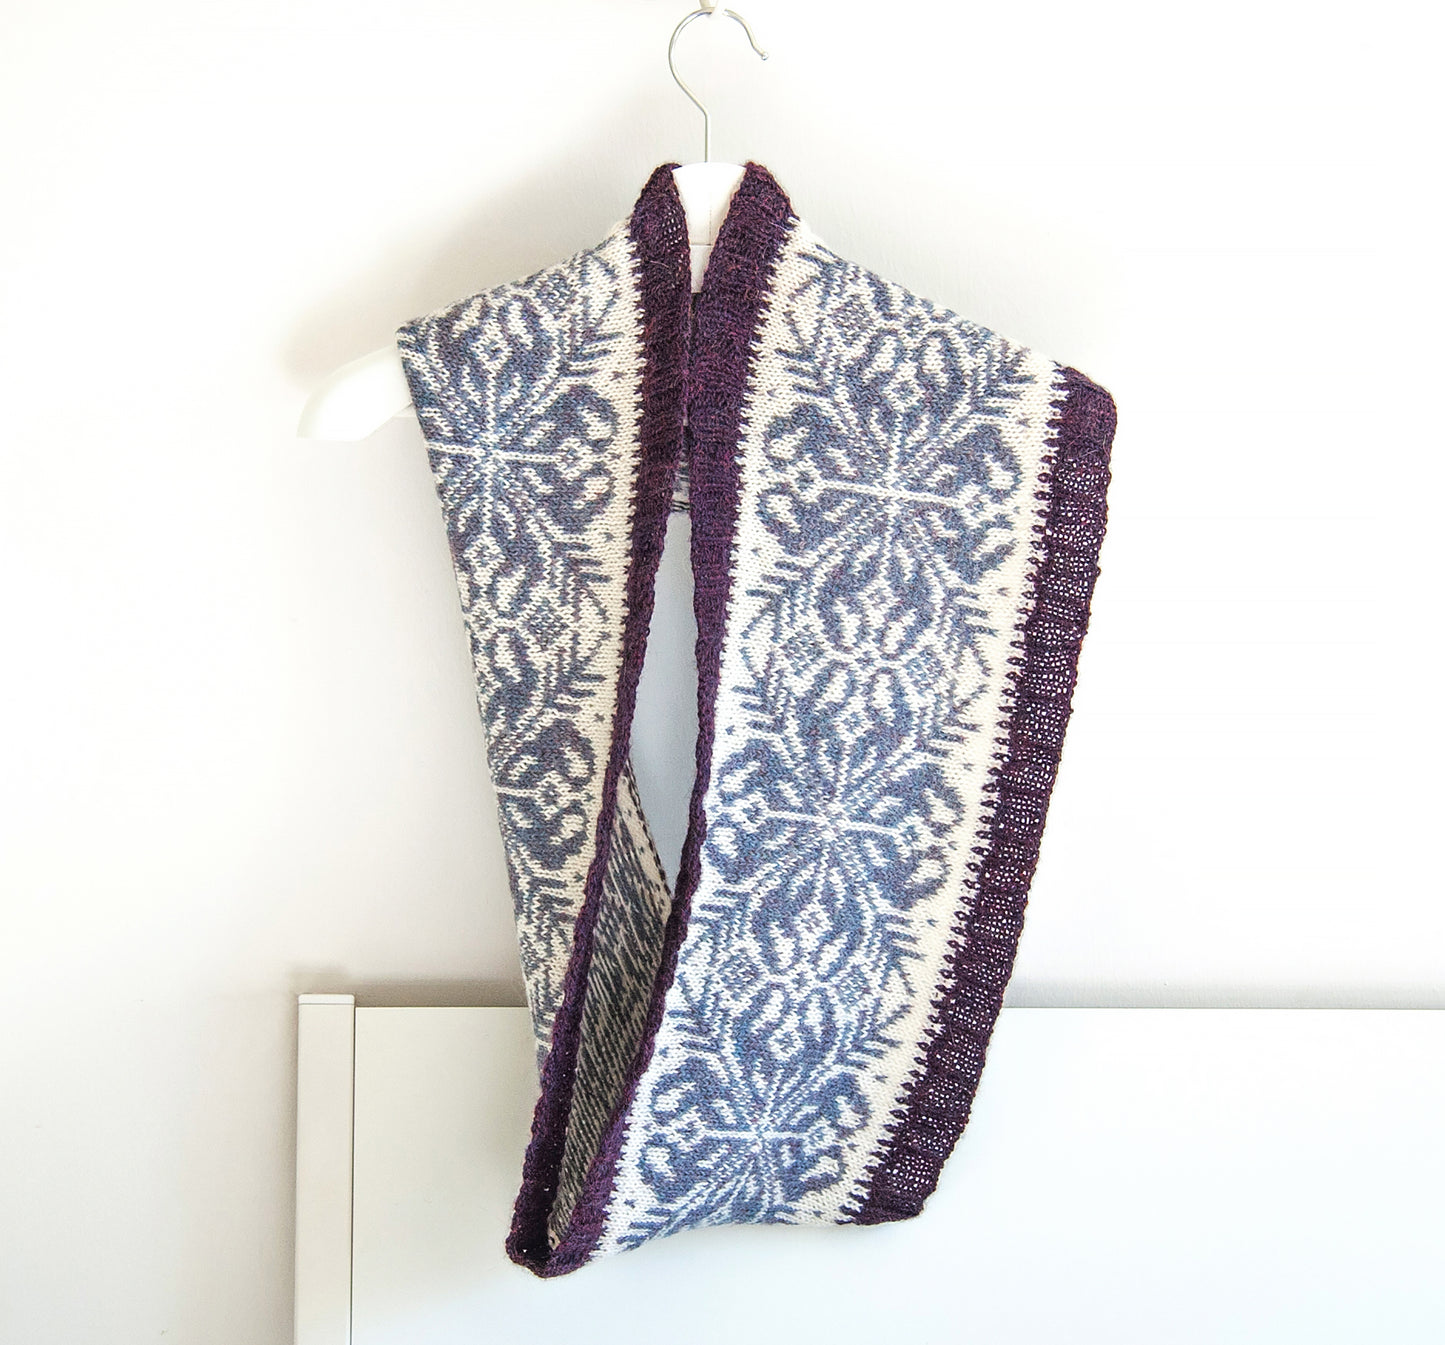 hand-knitted Fair Isle cowl  in Snowflake pattern made from purple and white alpaca wool yarn